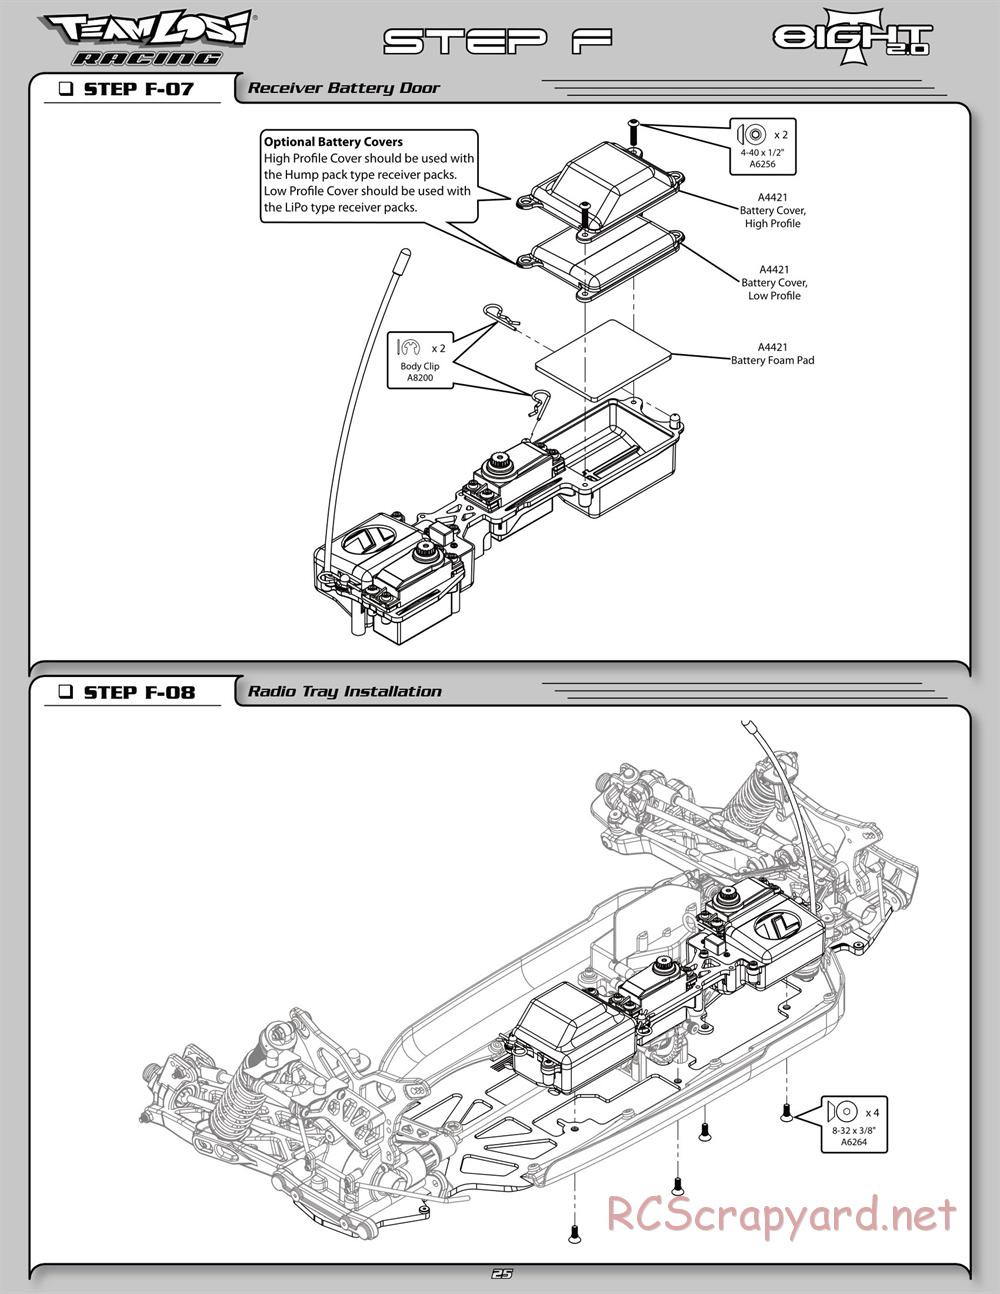 Team Losi - 8ight-T 2.0 Race Roller - Manual - Page 30